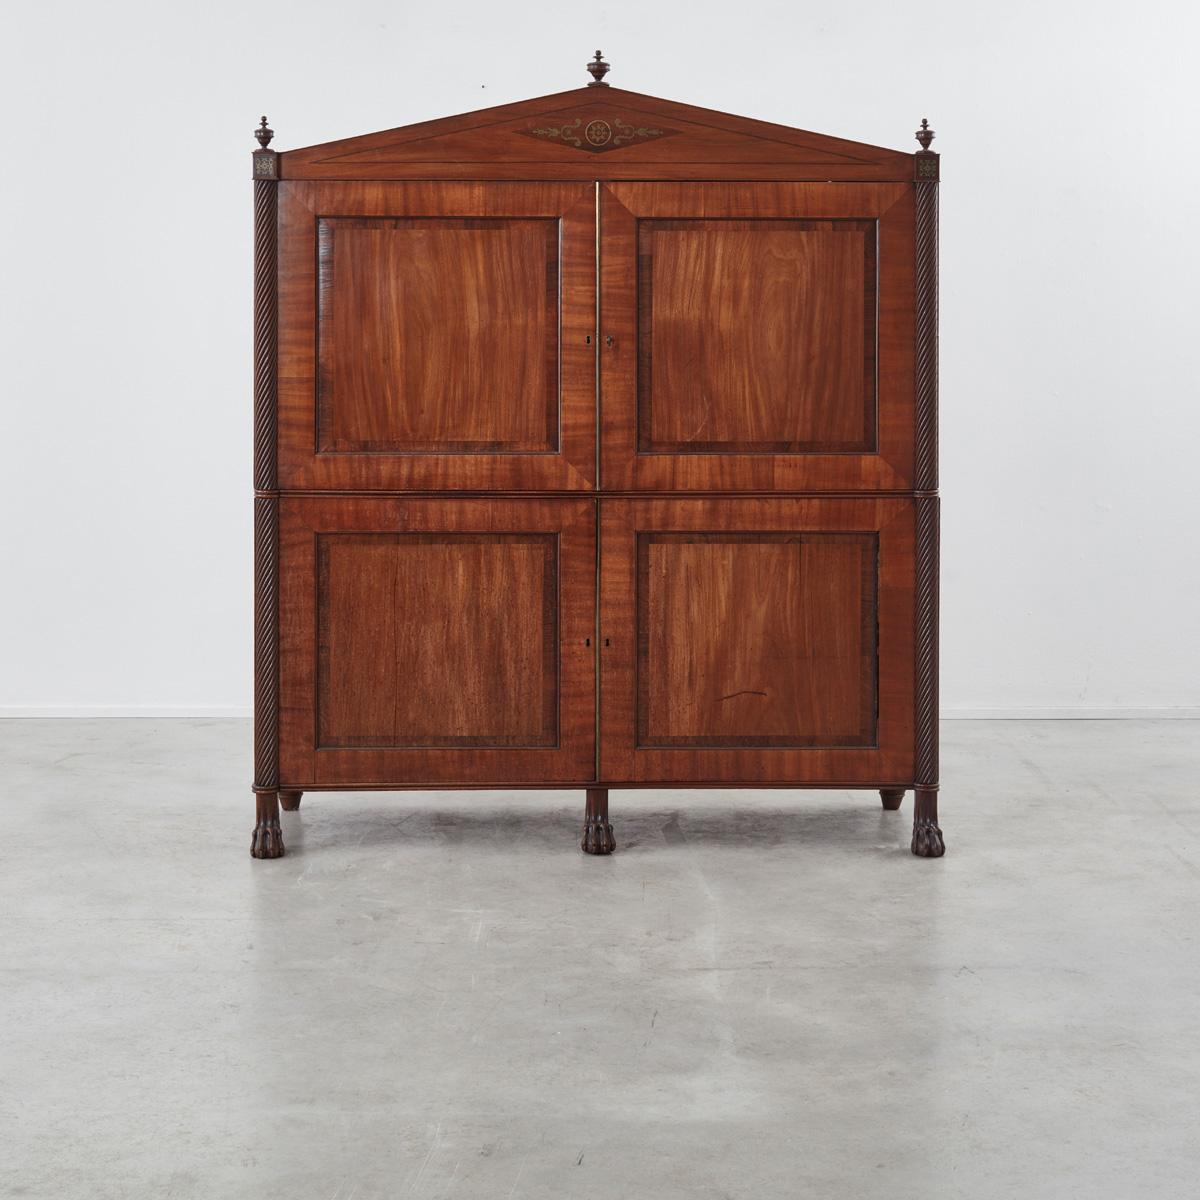 Wood 1820s German Mahogany Wardrobe with Classical Motifs For Sale